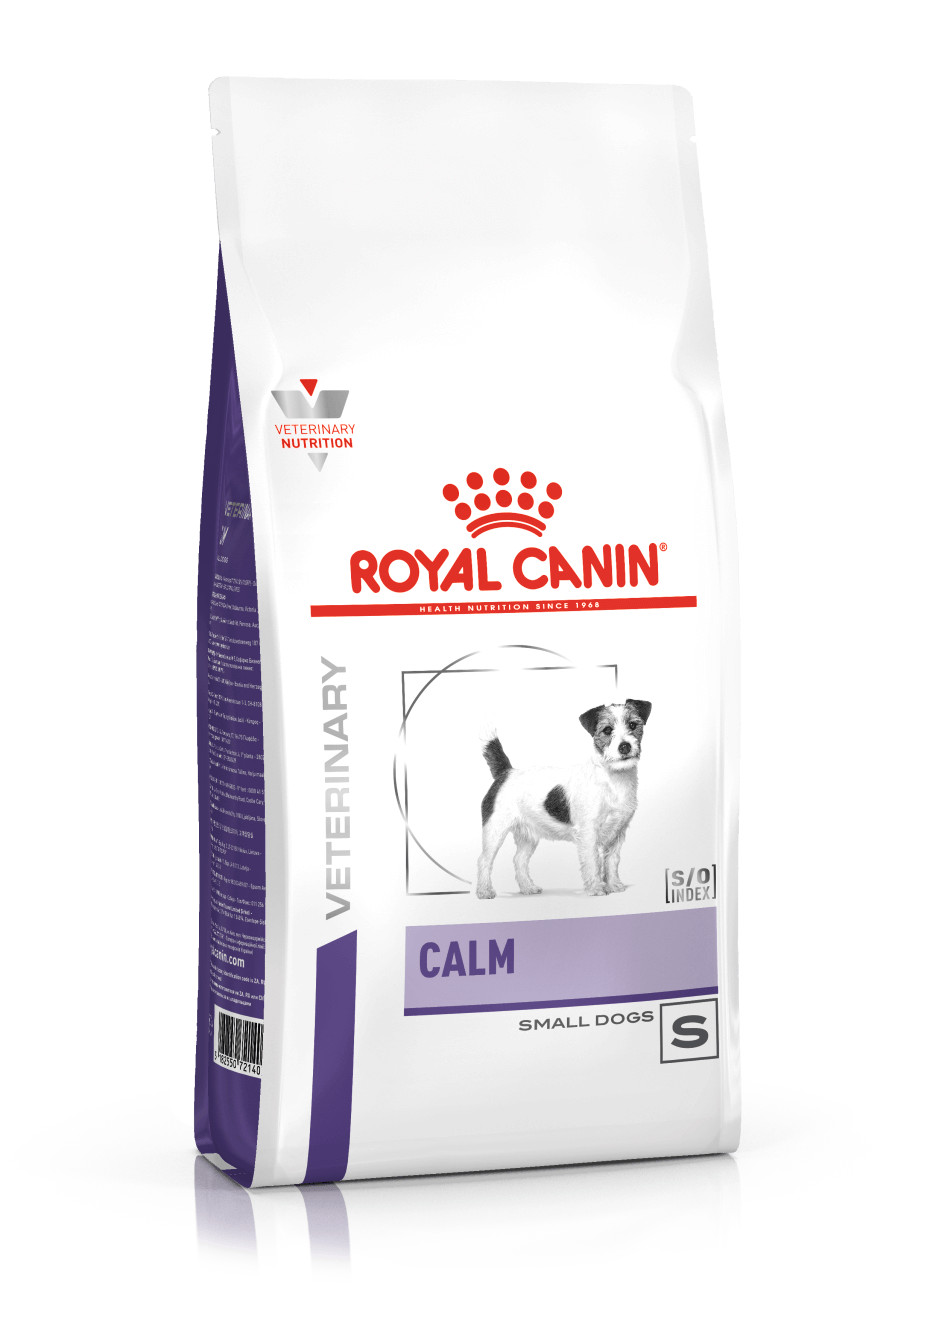 Royal Canin Expert Calm Small Dogs Hundefutter